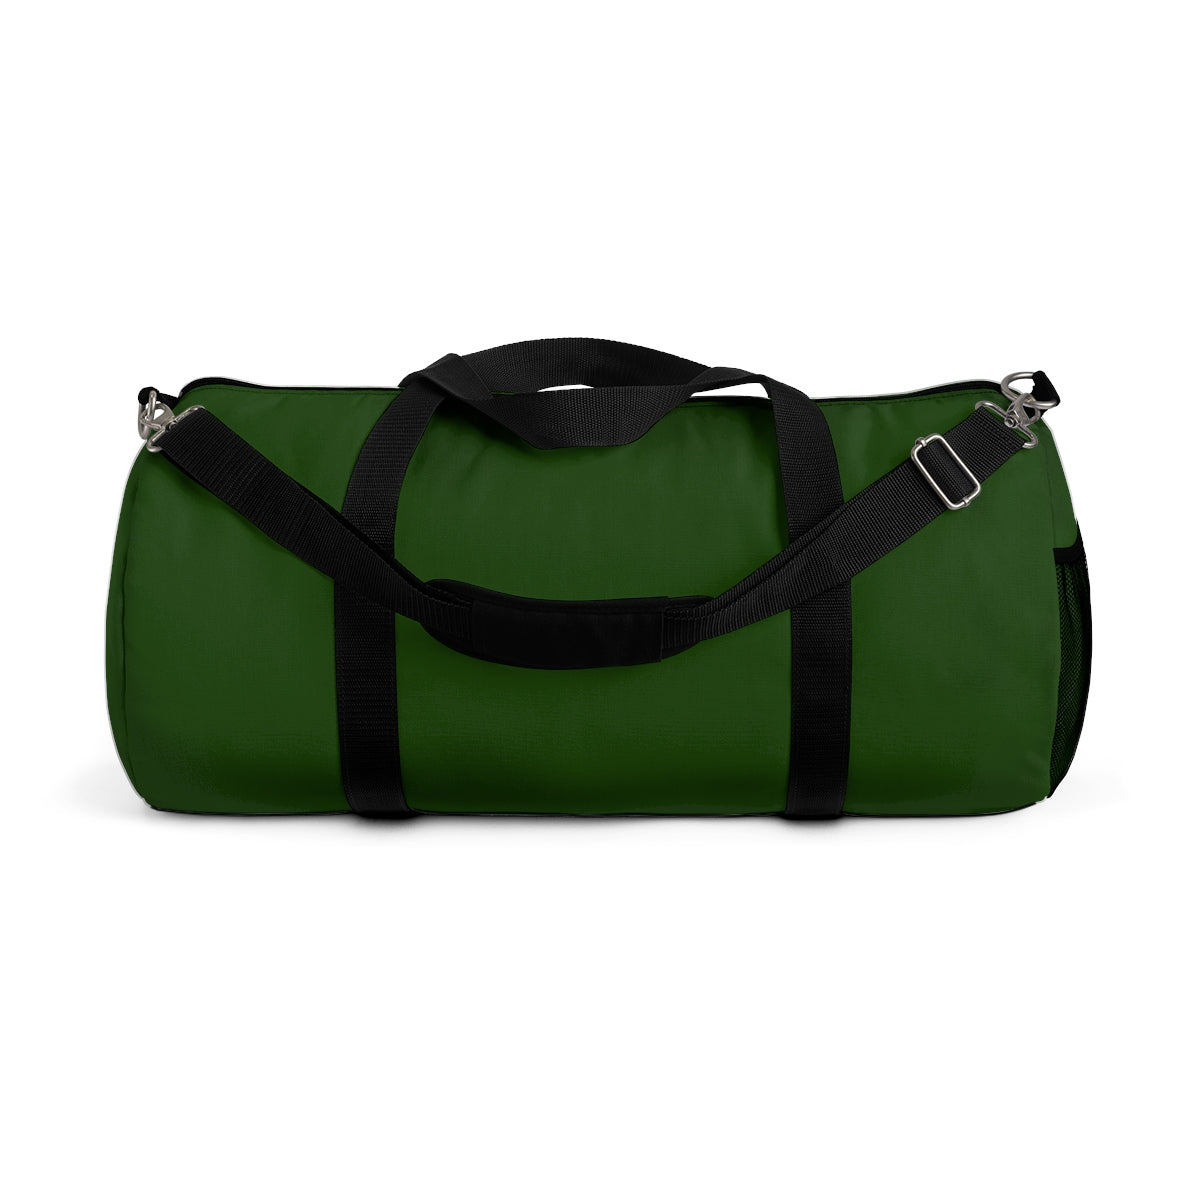 Emerald Green Solid Color All Day Small Or Large Size Duffel Bag, Made in USA-Duffel Bag-Small-Heidi Kimura Art LLC